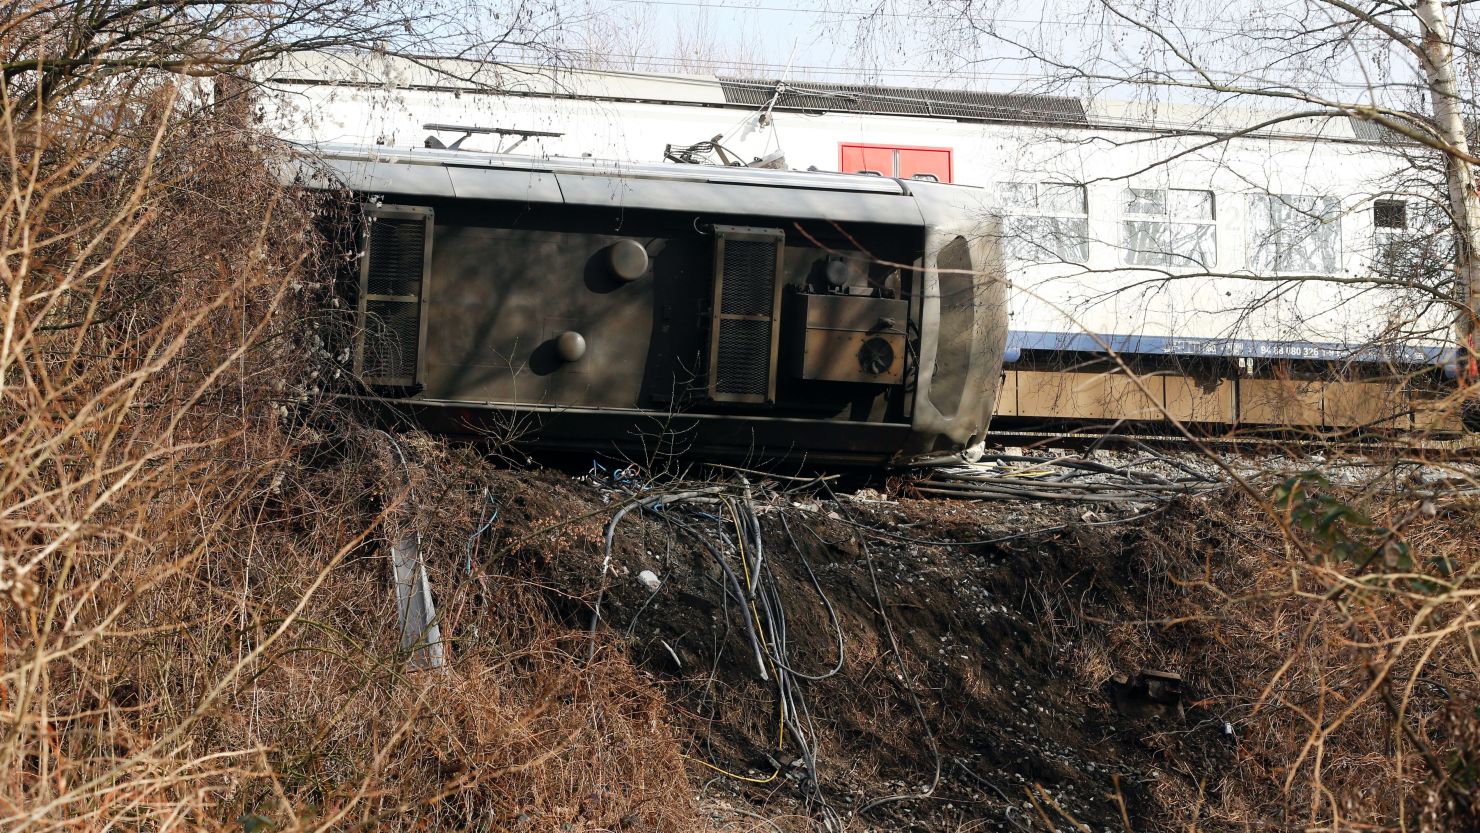 The train derailed shortly after leaving Leuven station Saturday, causing one car to overturn.